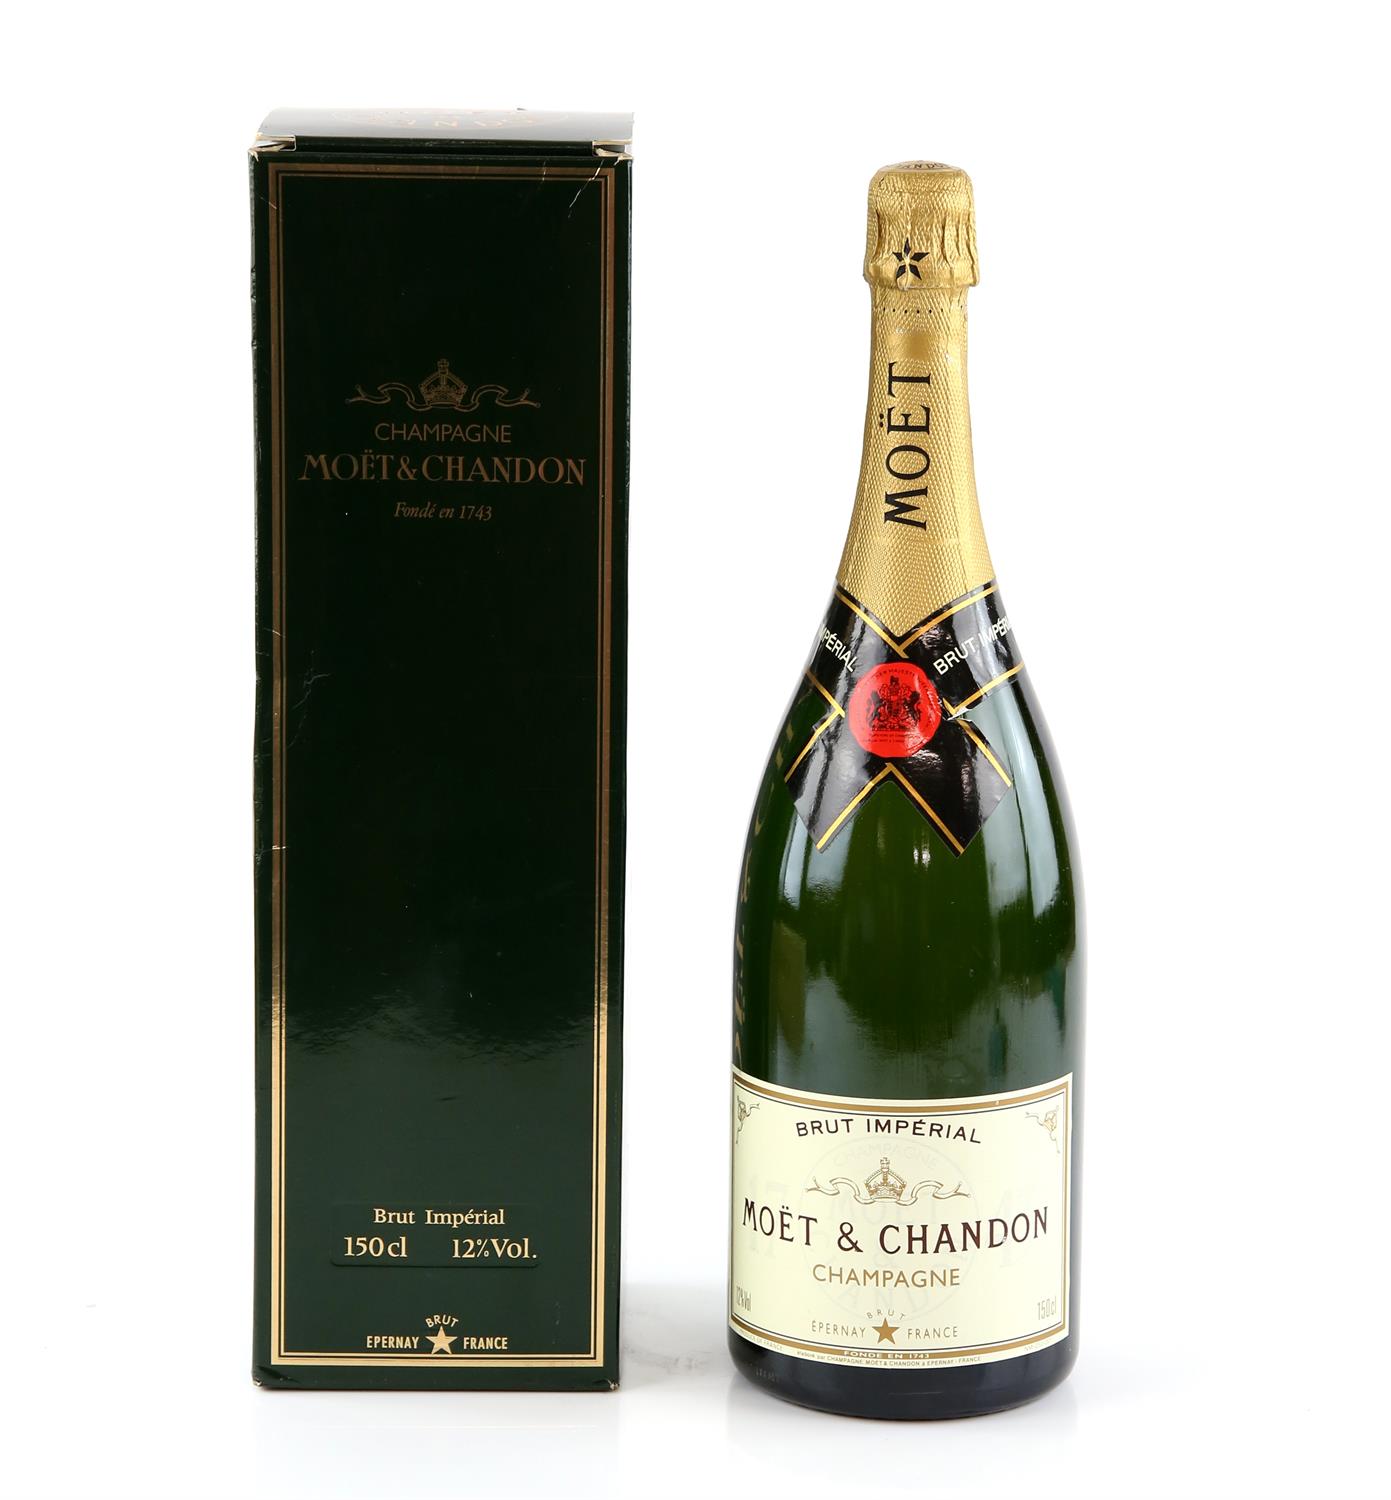 One magnum of Moet & Chandon Brut Imperial Champagne, 150cl, in original box